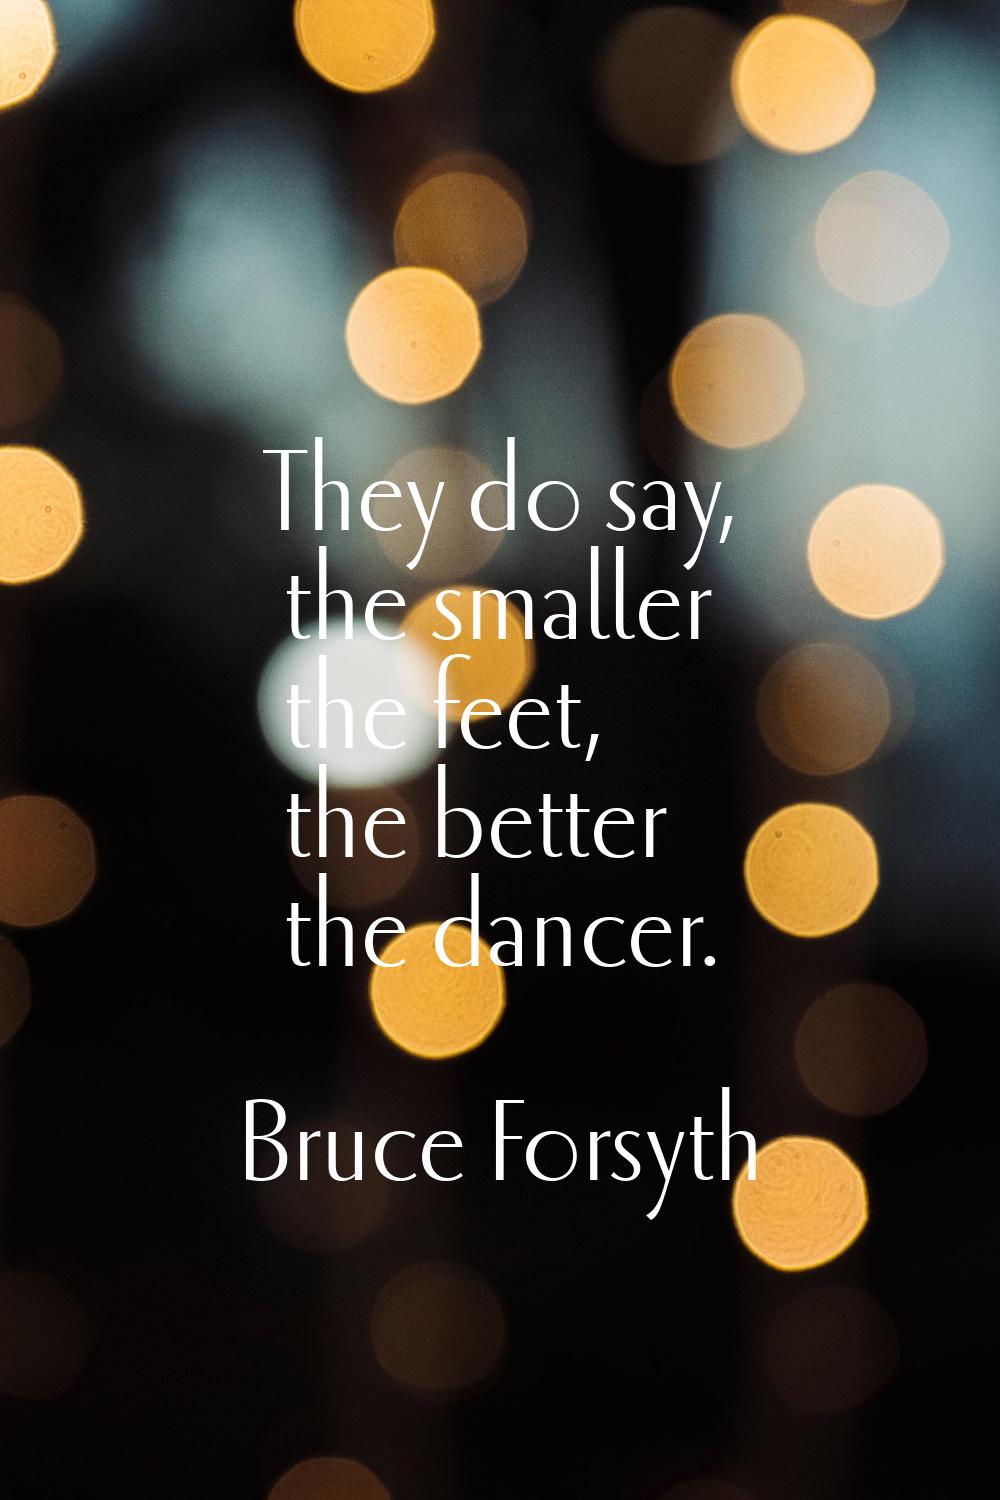 They do say, the smaller the feet, the better the dancer.